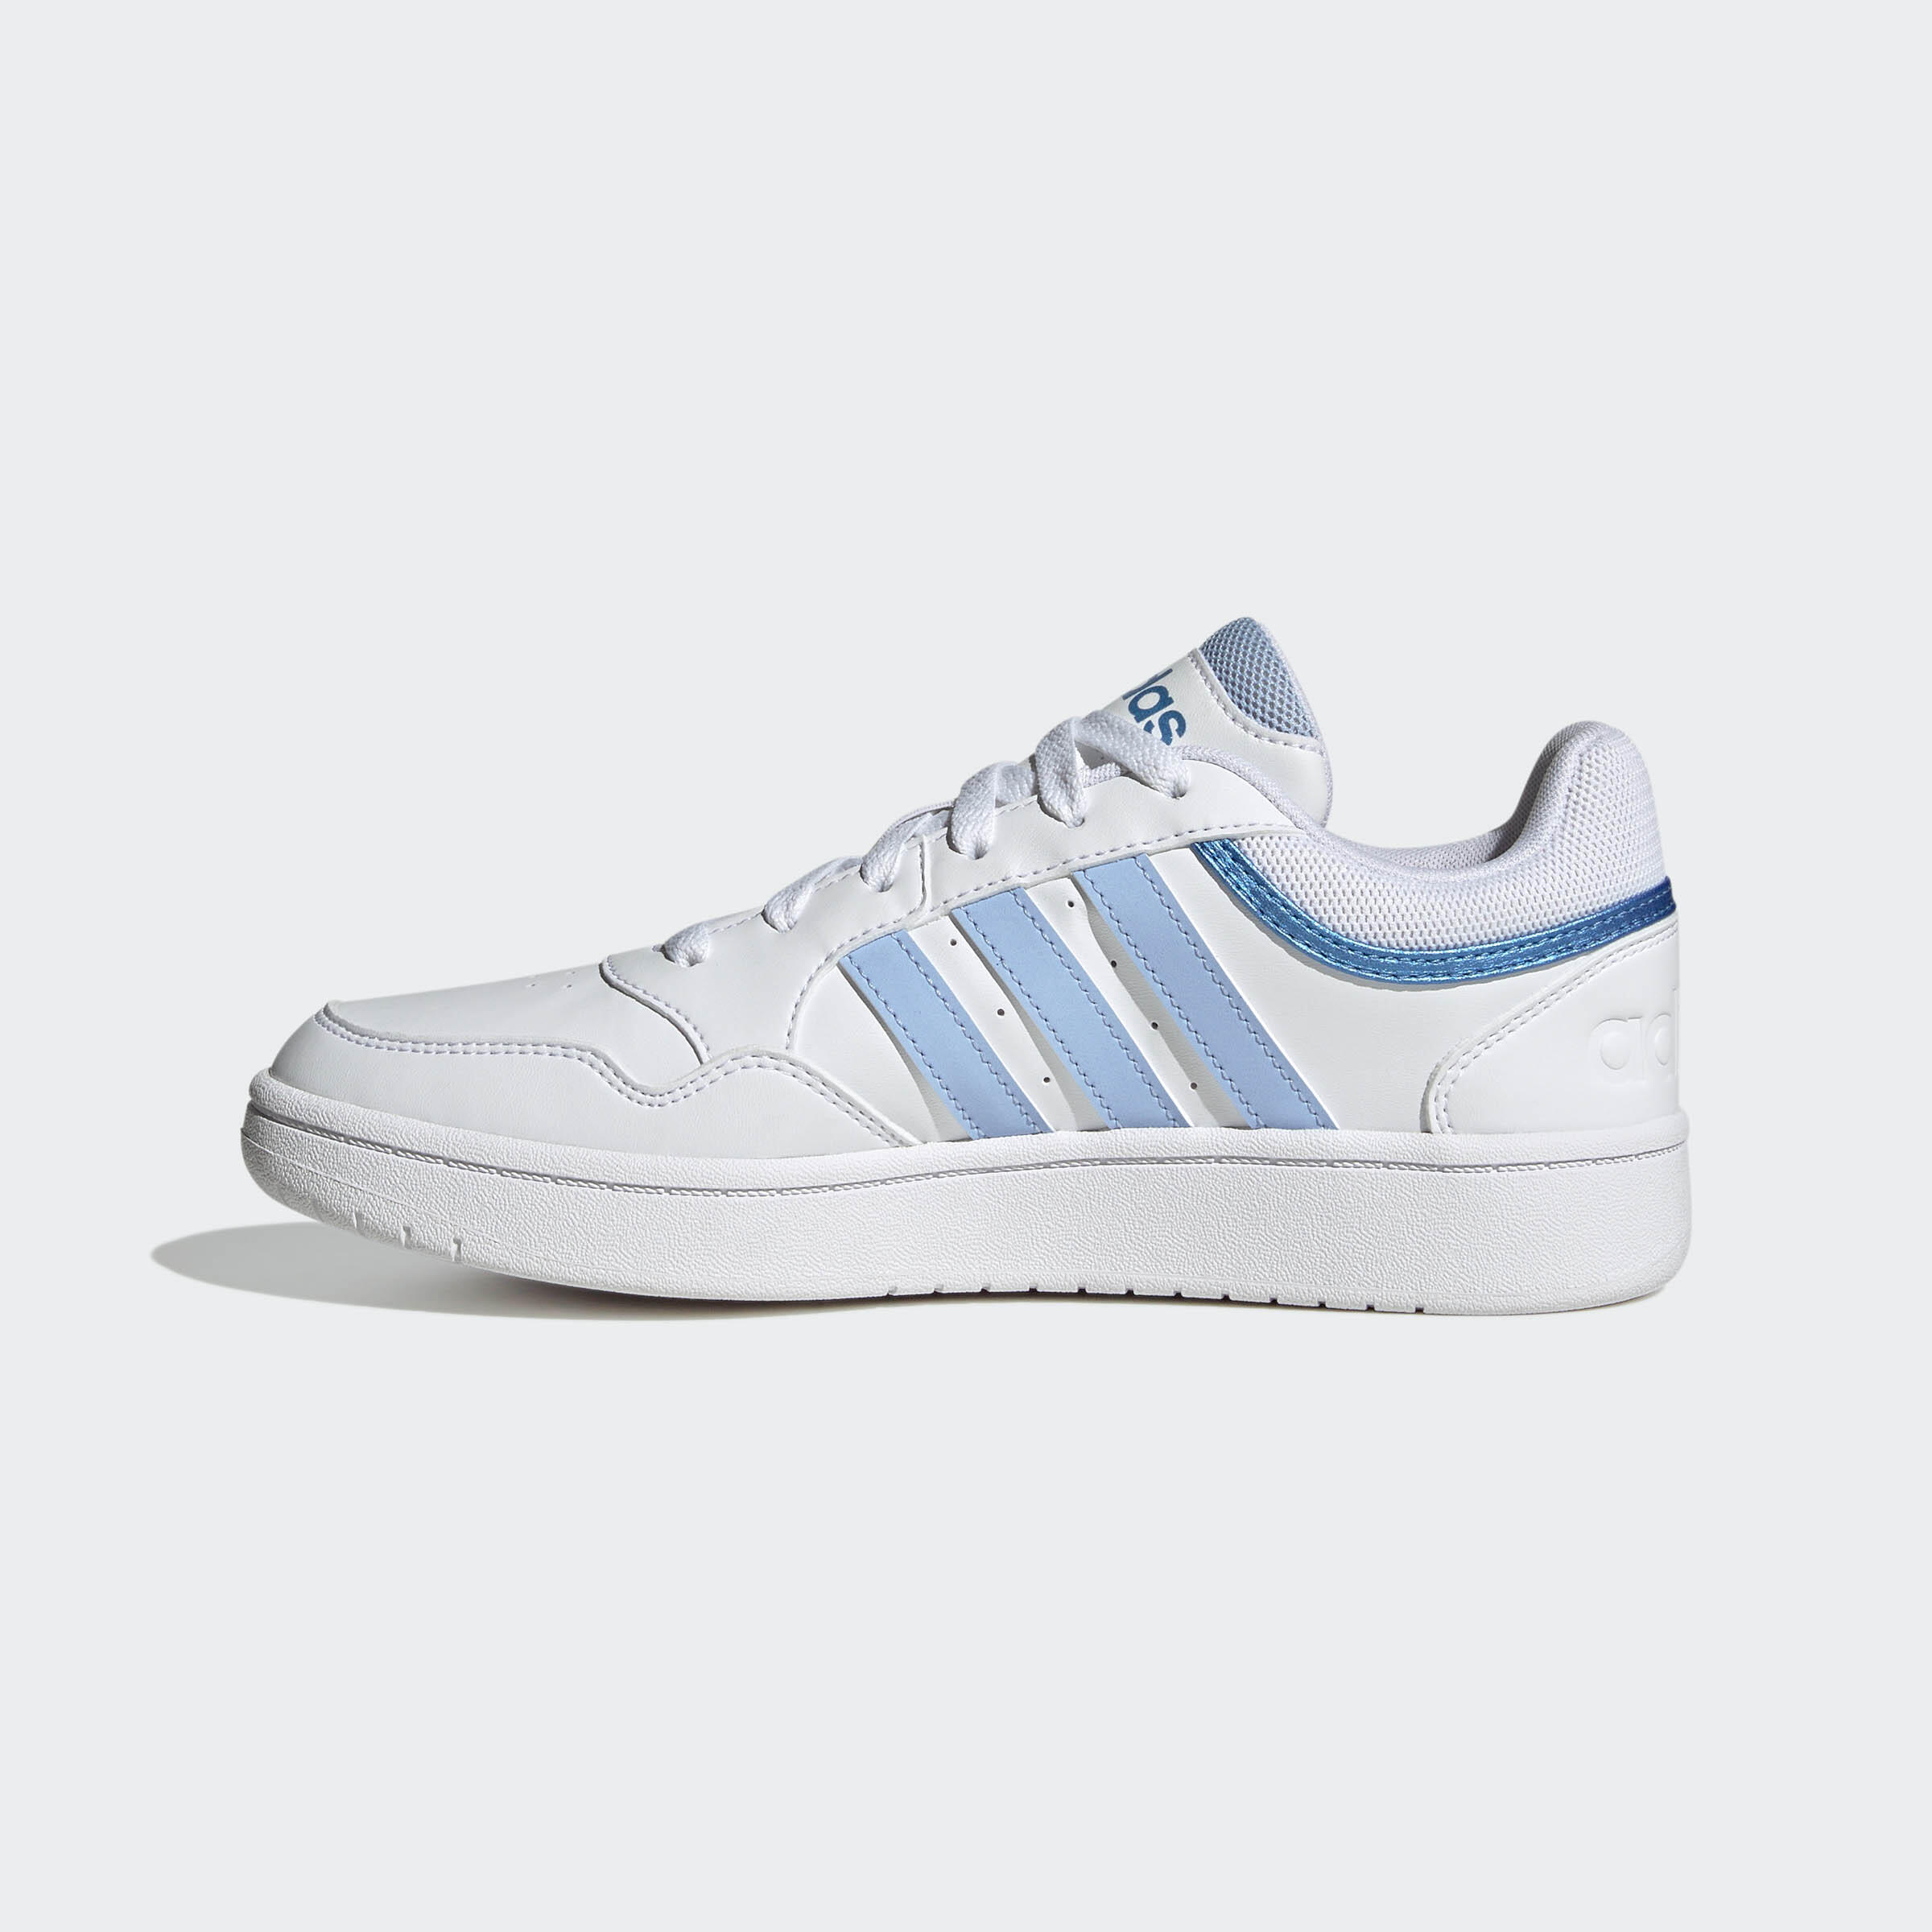 WOMEN'S ADIDAS HOOPS 3.0 SHOES - WHITE 3/5